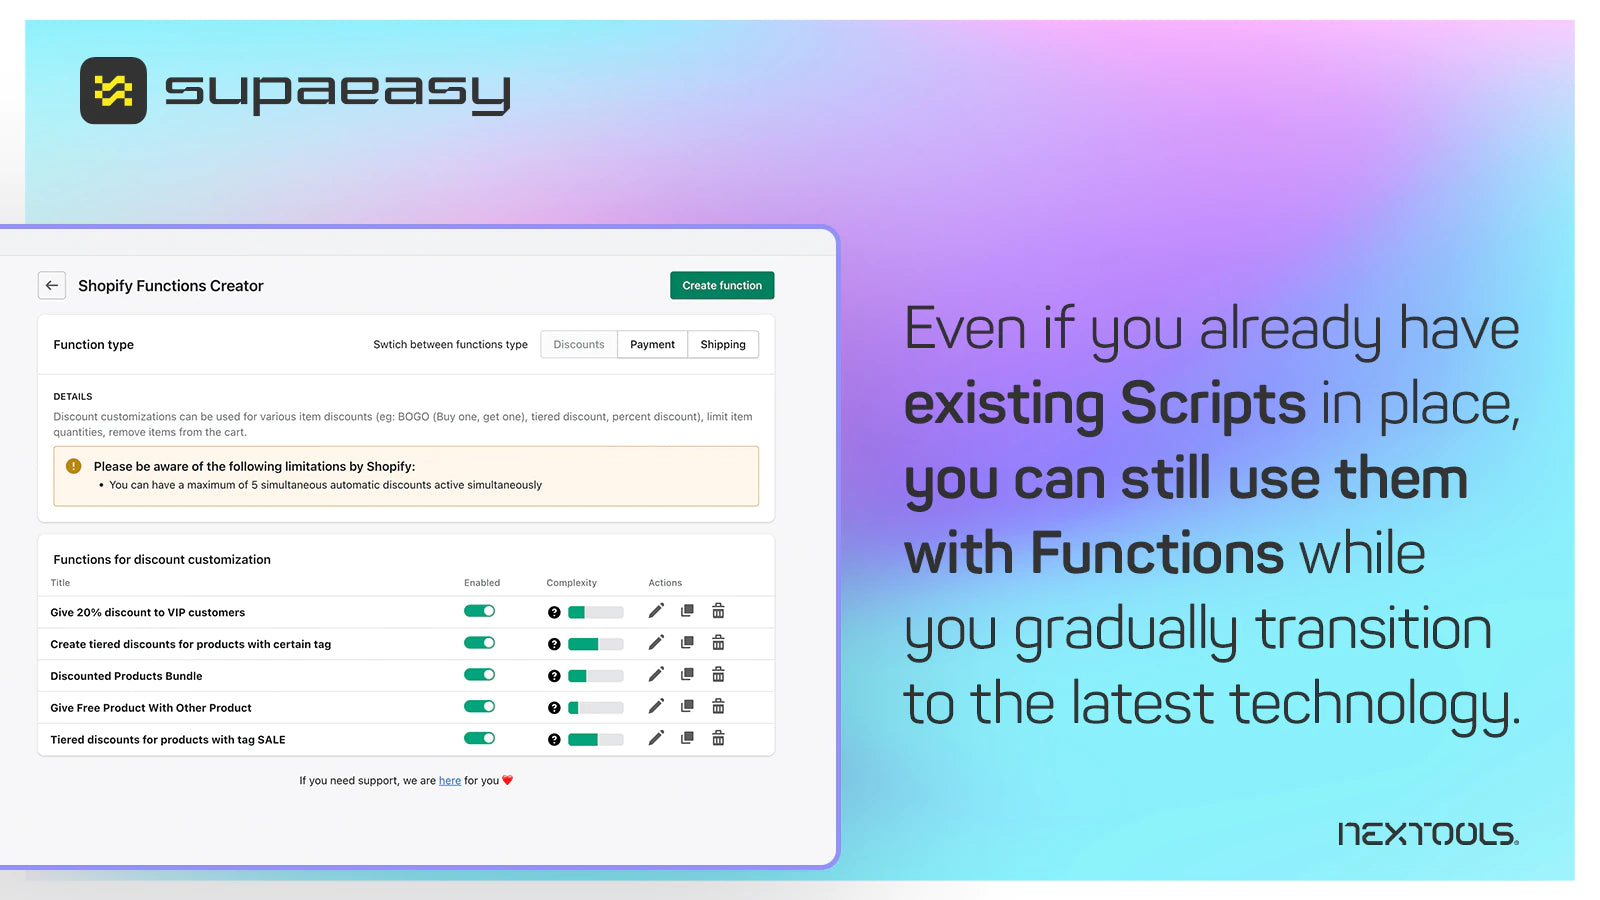 Functions copy paste Generates Migrate functions discounts